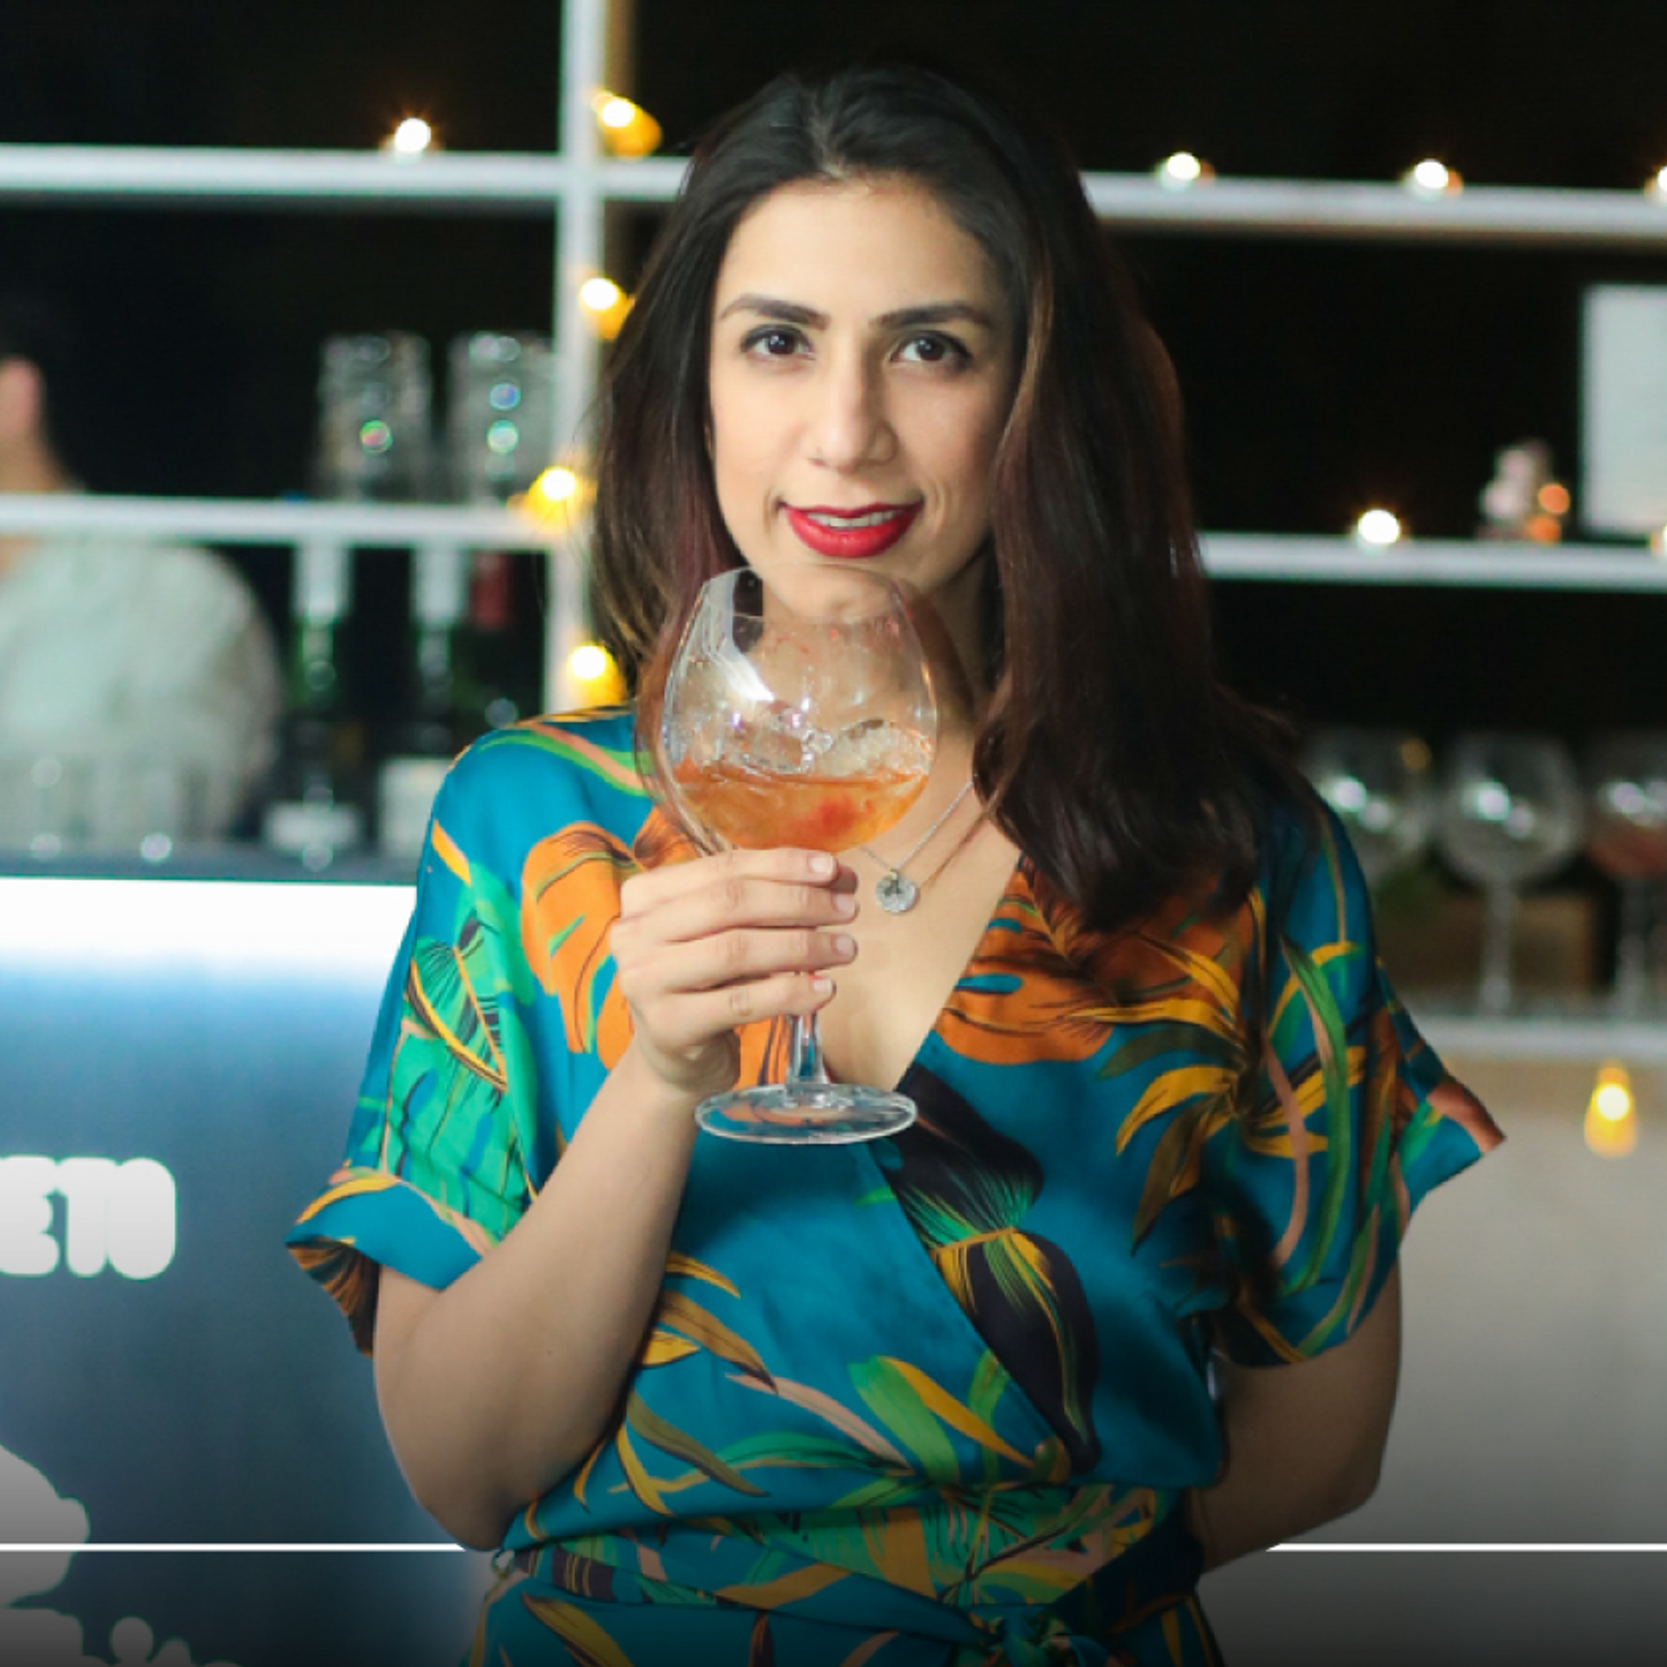 Every gin has a story and a unique persona, says Anthem founder Anjali Batra